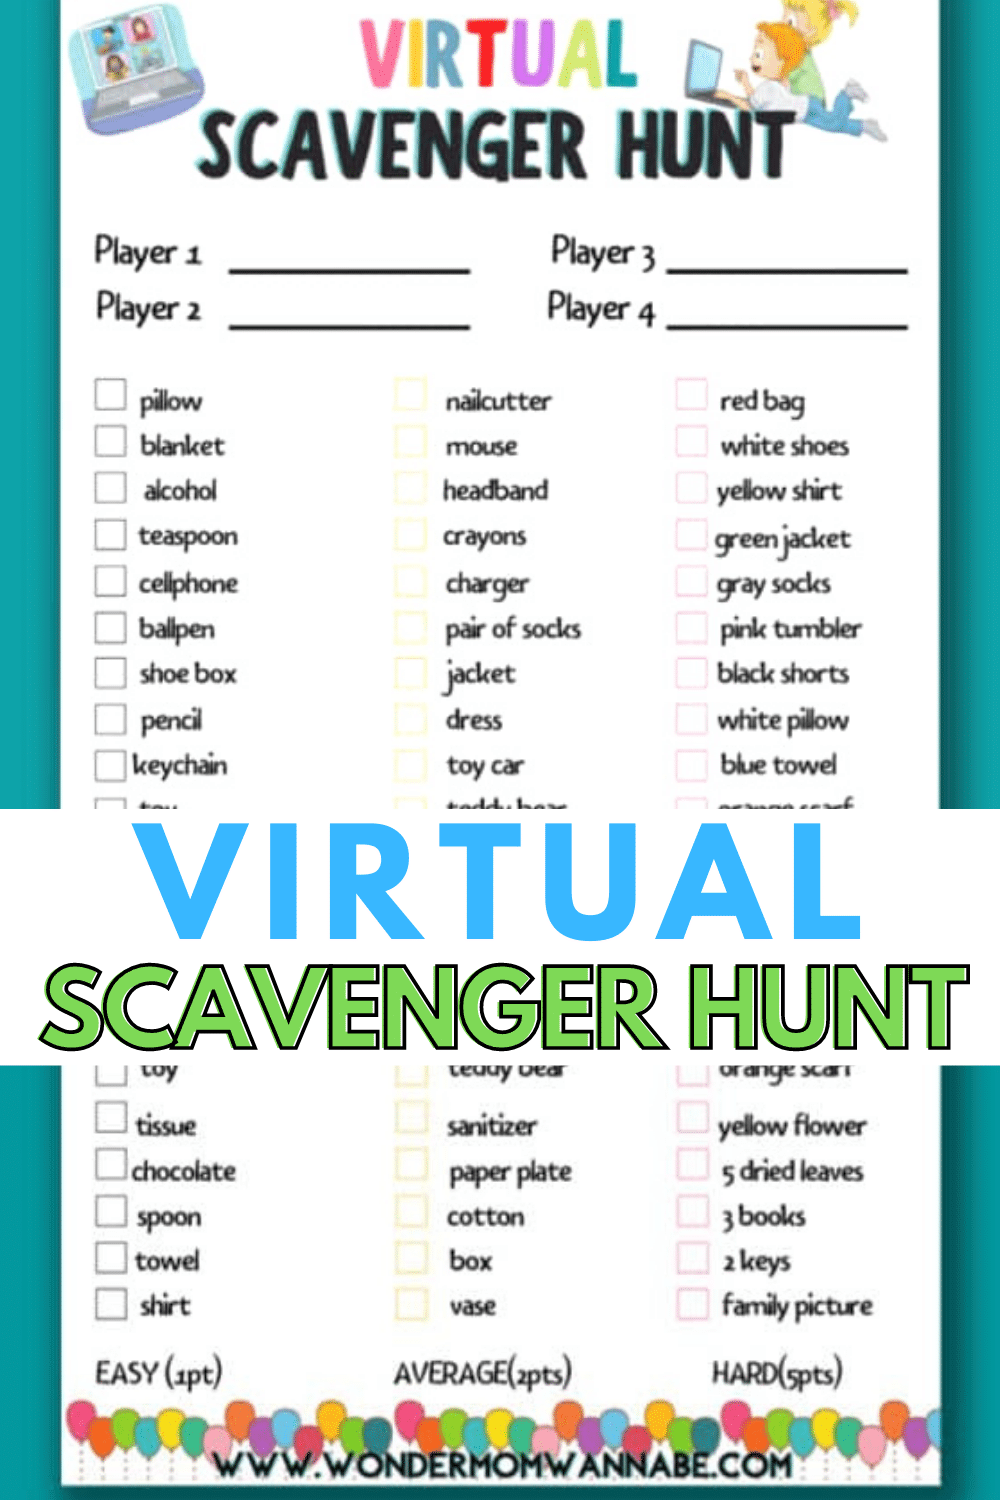 A printable Virtual Scavenger Hunt is a great way to connect with friends virtually while playing a fun and interactive game. #scavengerhunt #printables #virtualgames via @wondermomwannab